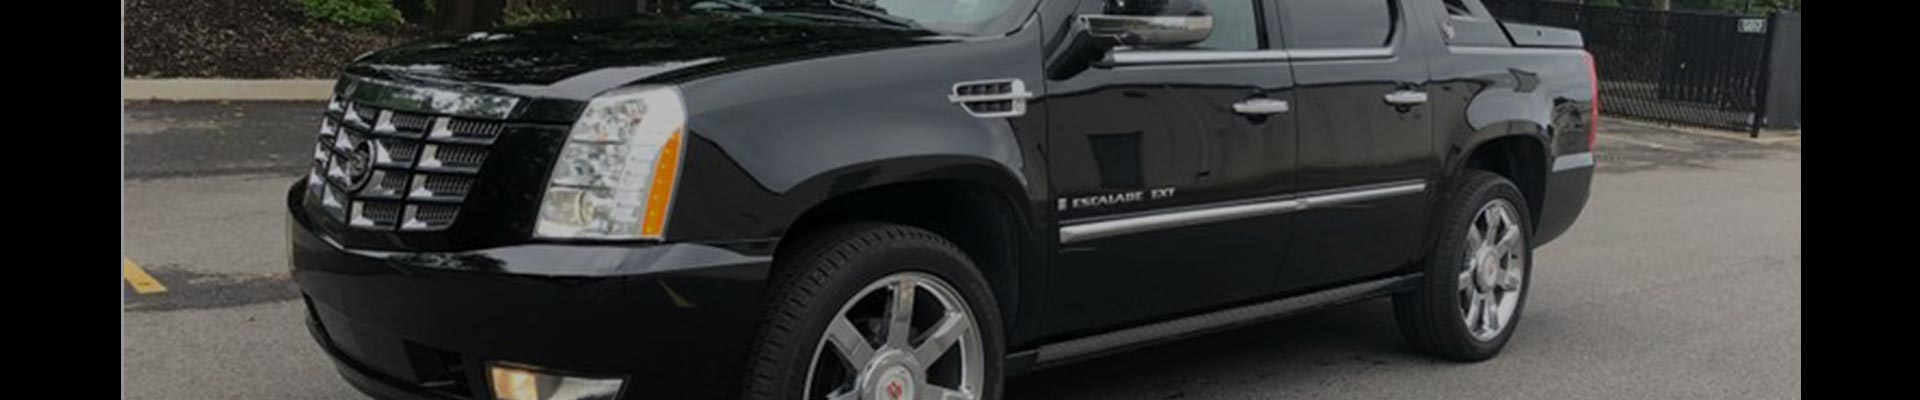 Shop Replacement and OEM Cadillac Escalade EXT Parts with Discounted Price on the Net